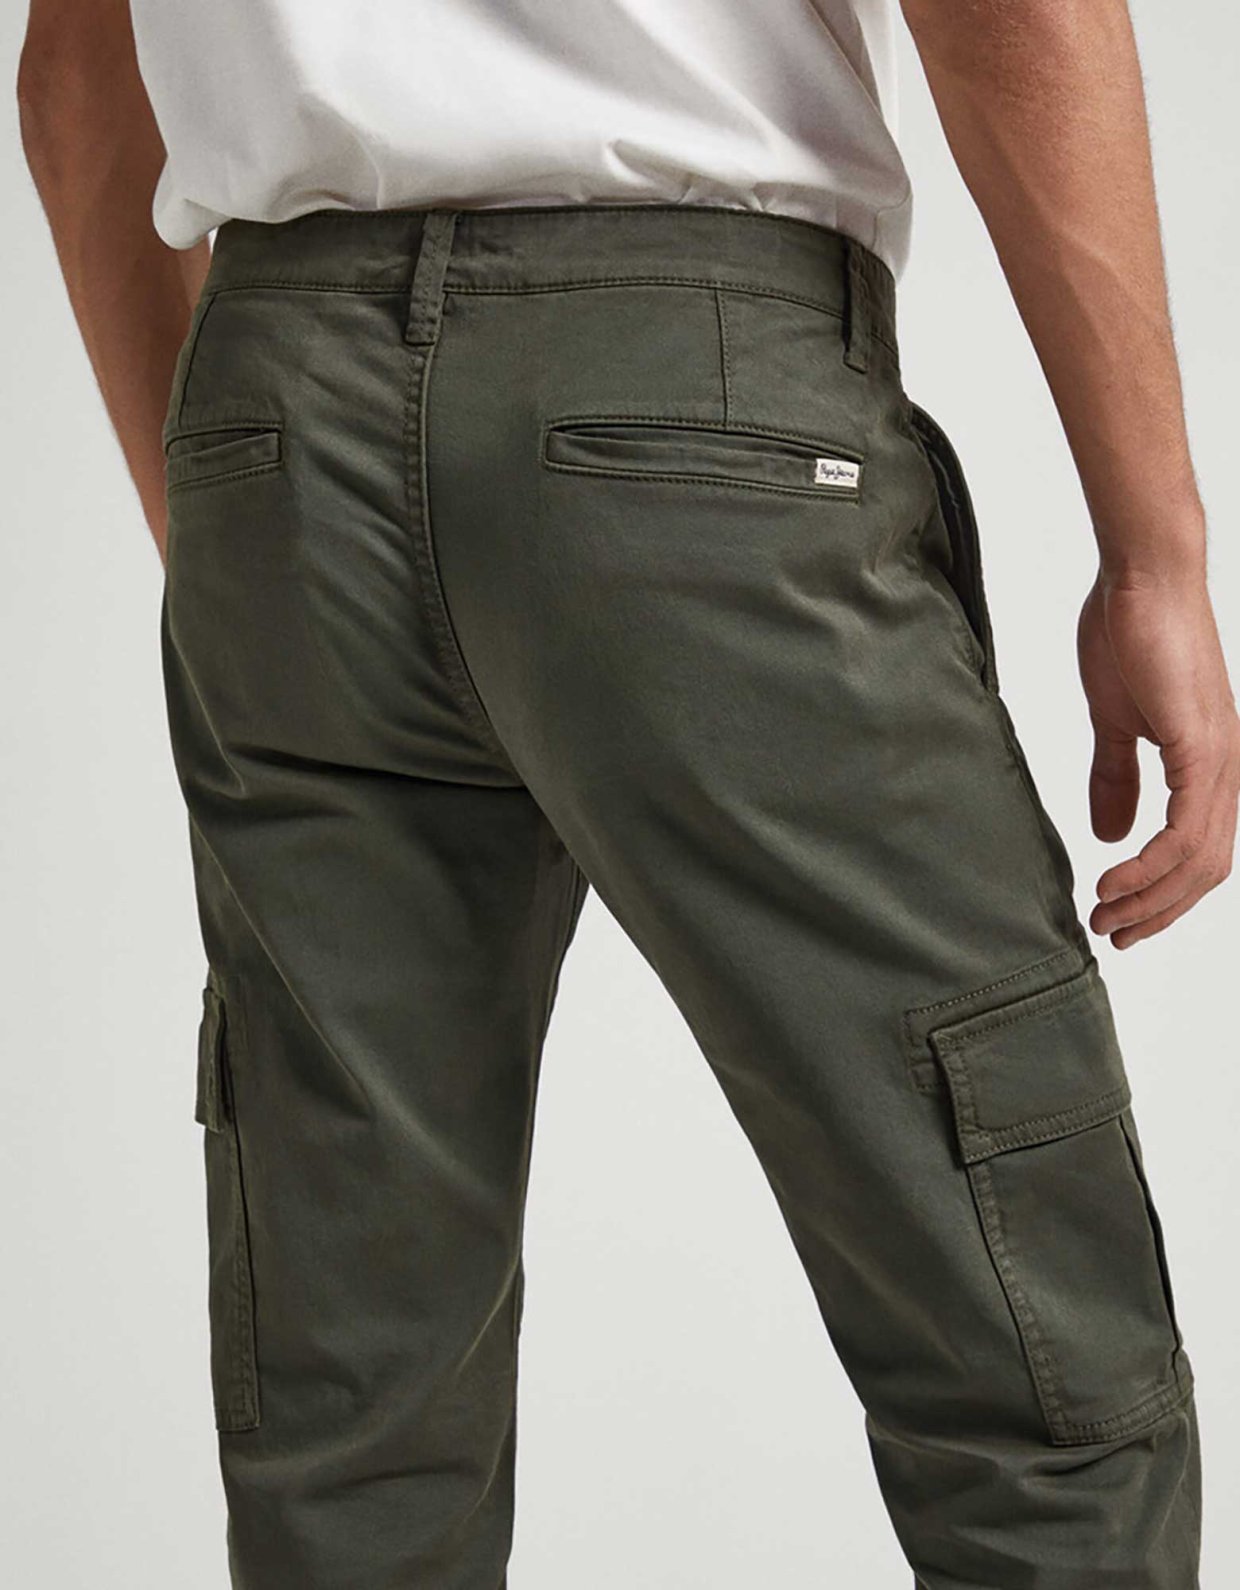 Pepe Jeans Sean 32 cargo pants olive